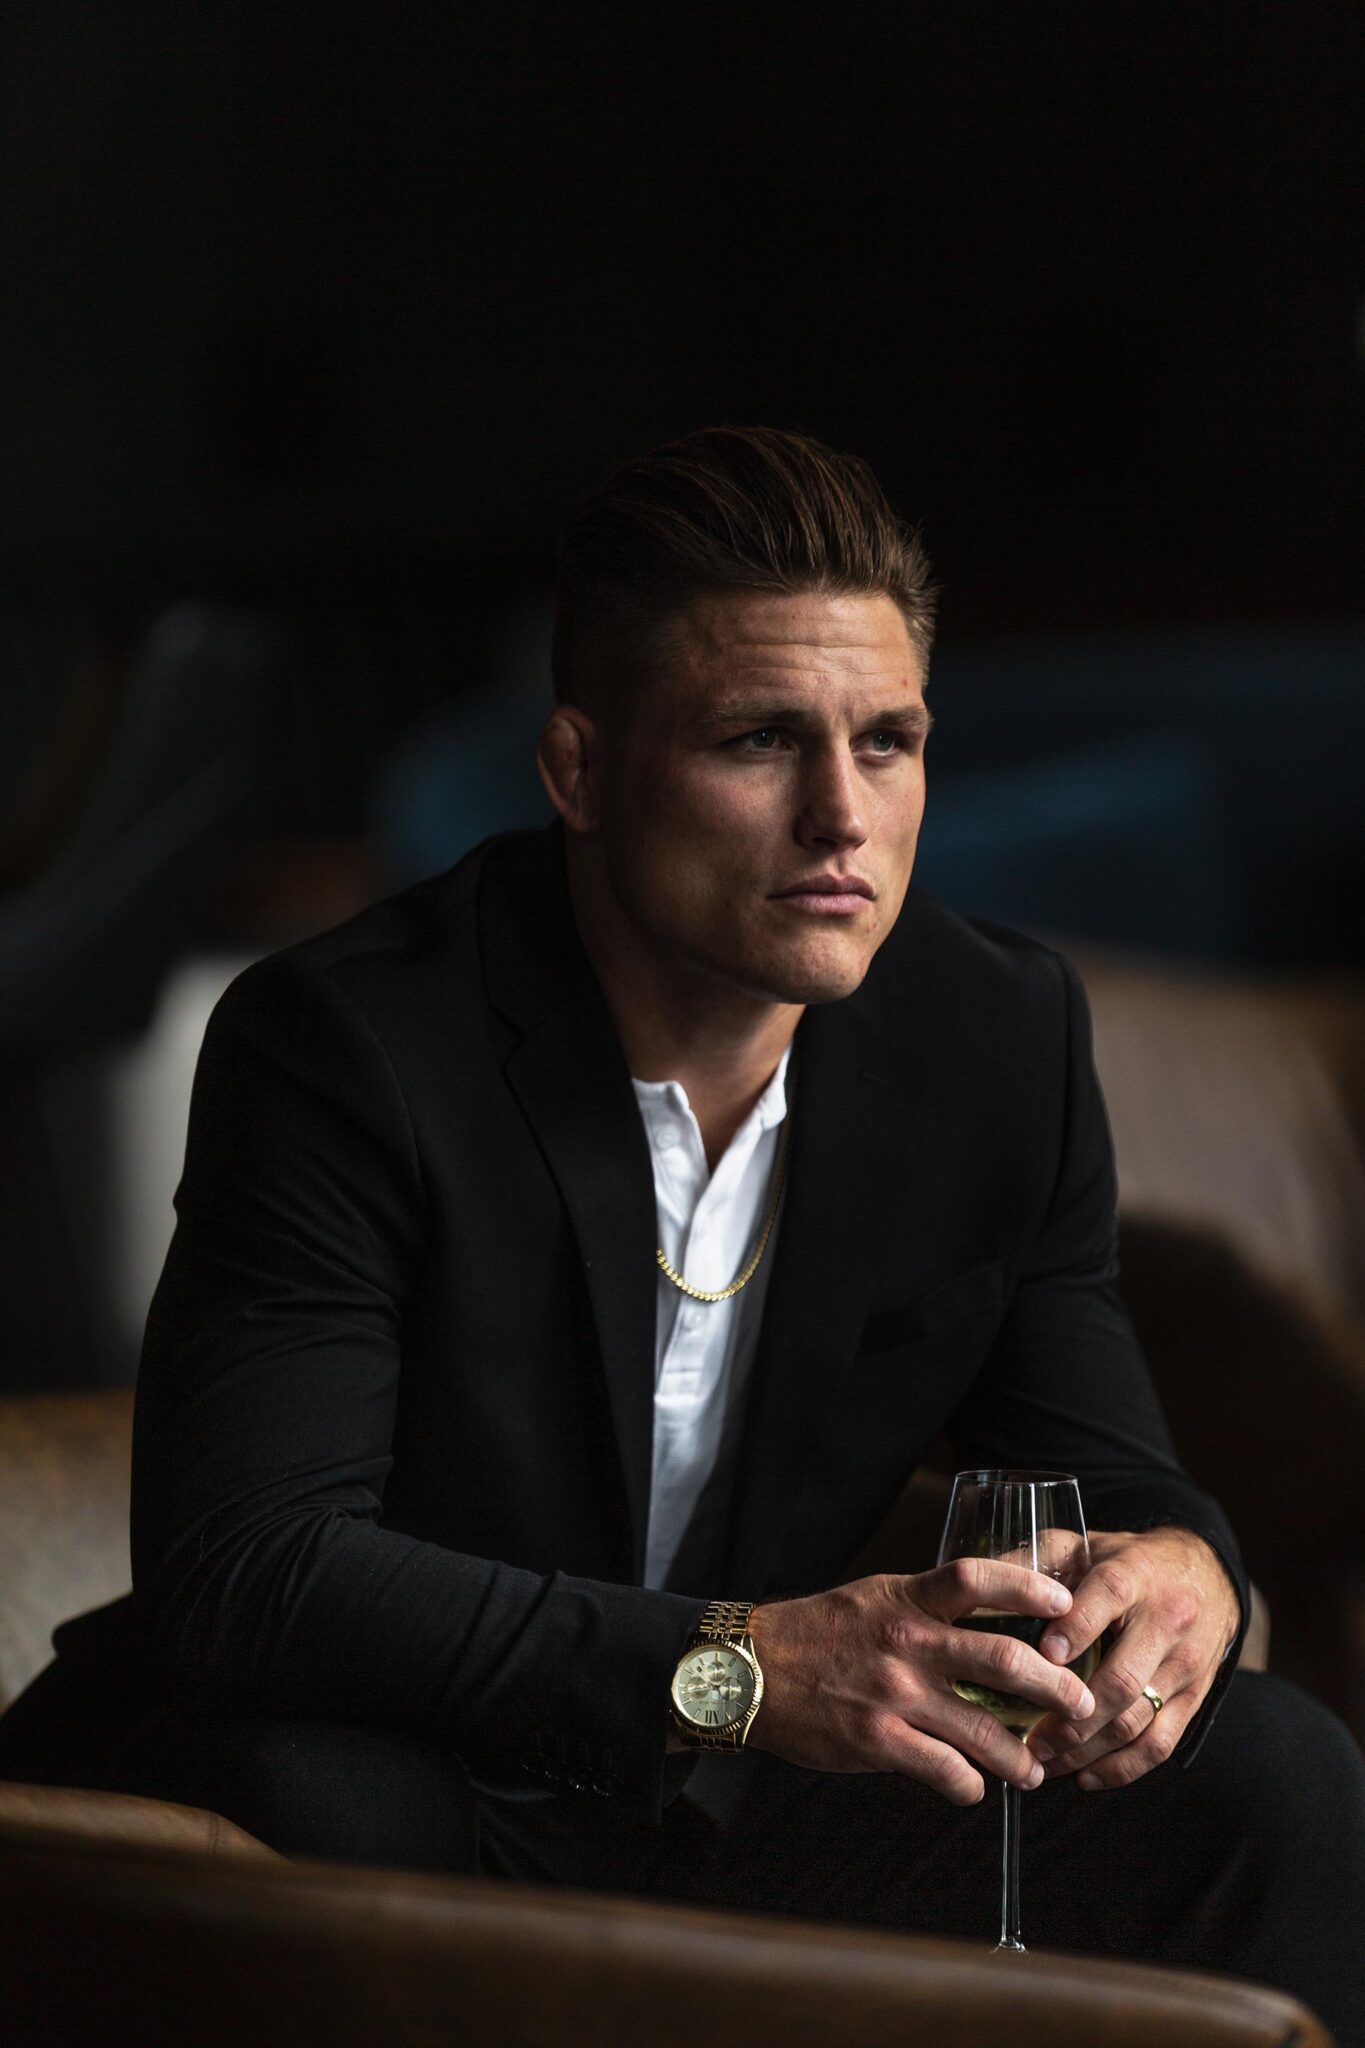 A photograph of by Jeff Fried of UFC Fighter, Drew Dober looking like James Bond